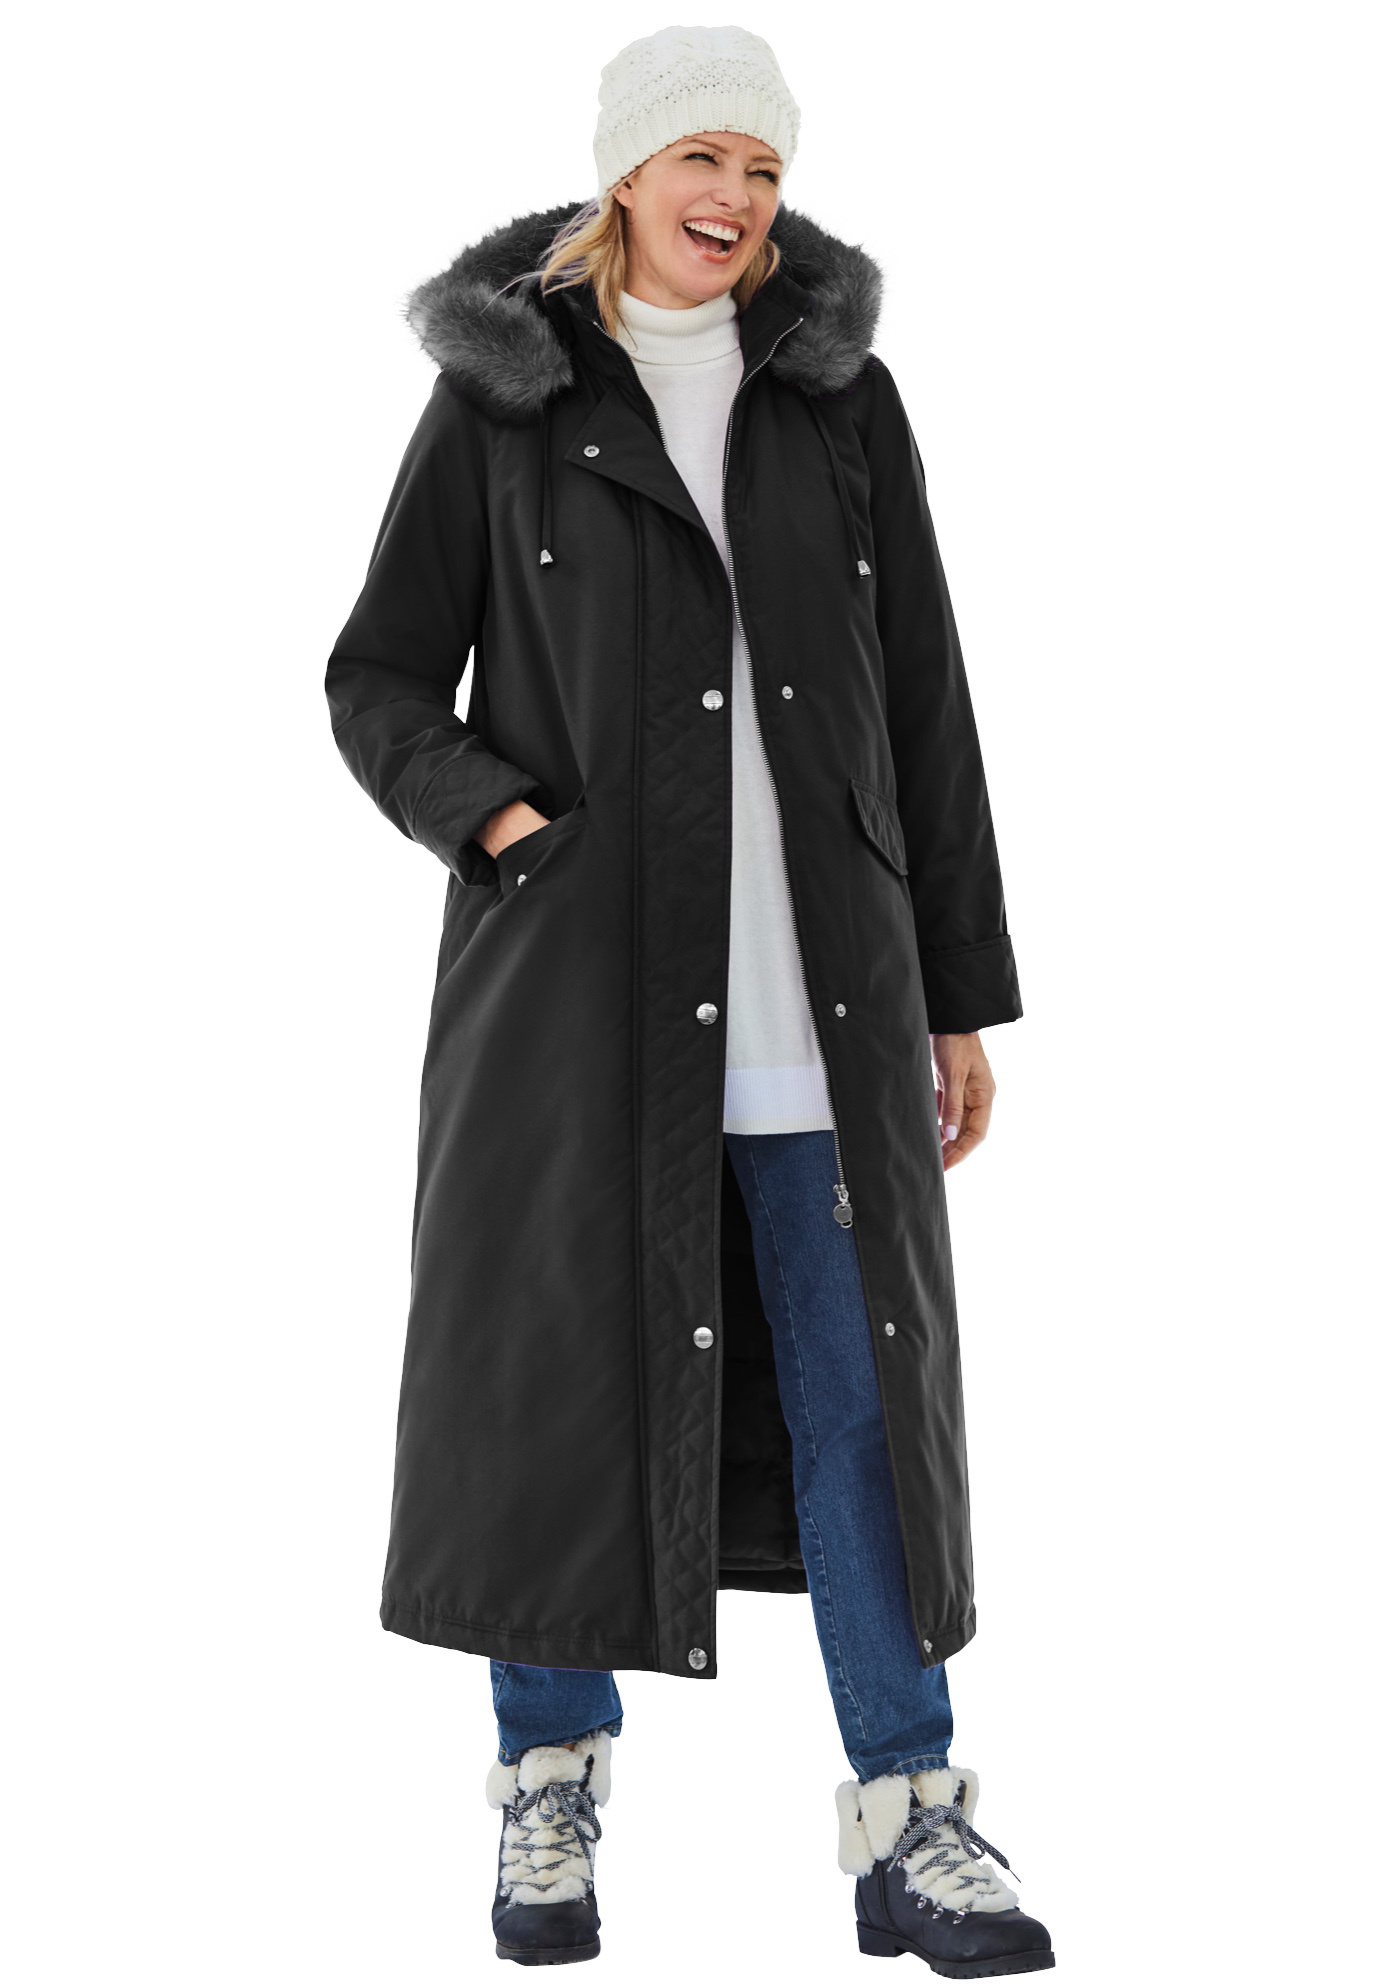 Woman Within Women's Plus Size Long Hooded Down Microfiber Parka Coat - image 1 of 3